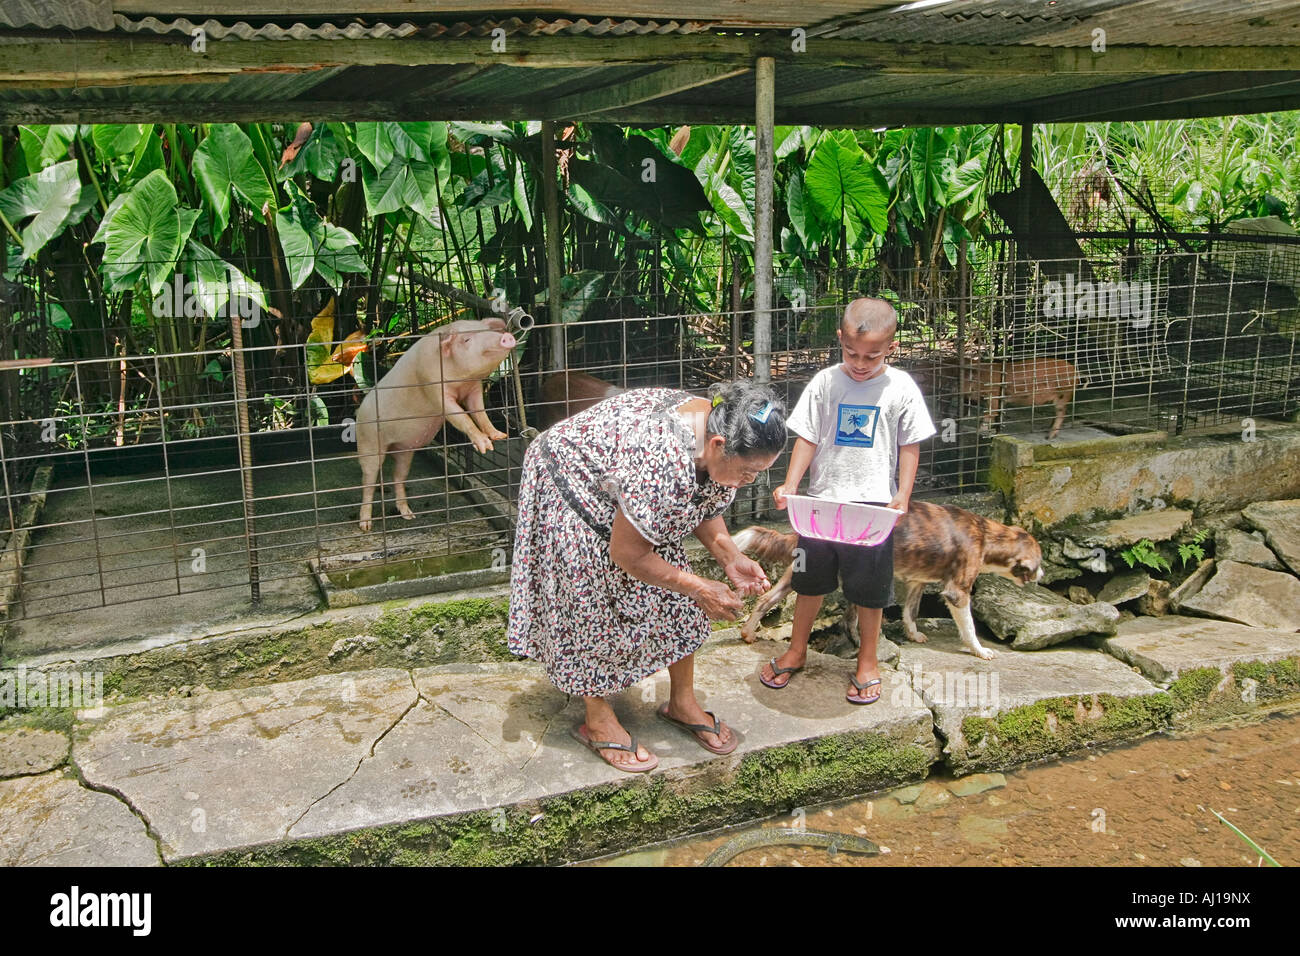 Kosrae native woman feeds eels in a channel at her eel farm while her son along with the family pig and dog look on Stock Photo